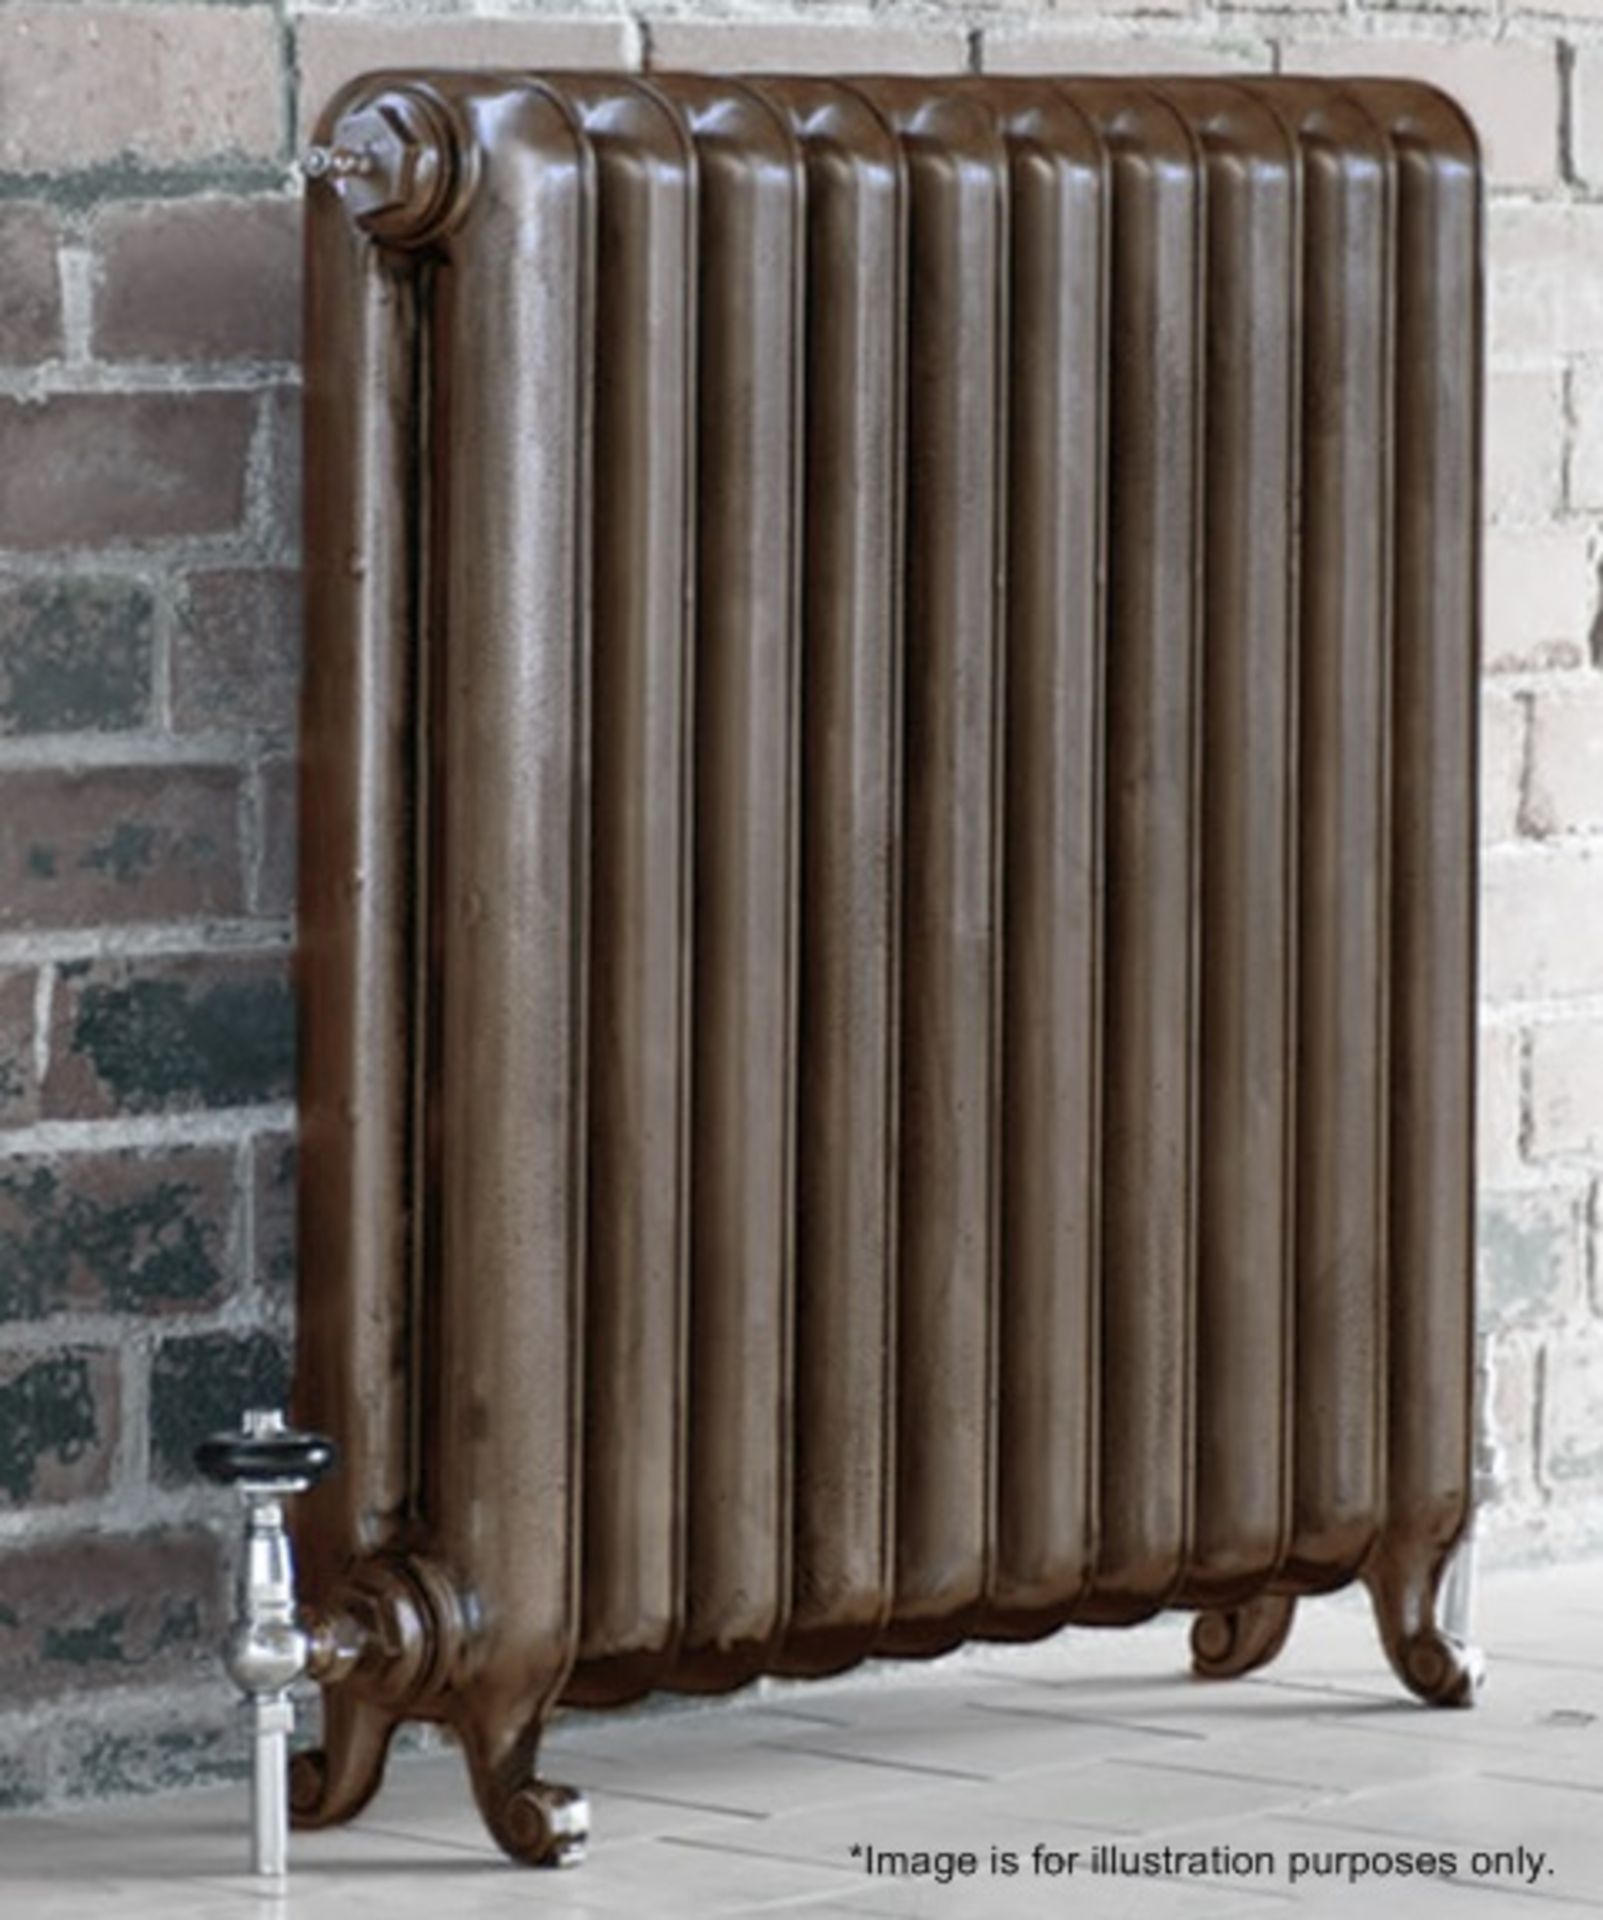 1 x Vintage Traditional Cast Iron 9-Section Radiator - Dimensions: W70 x H95cm - Ref: HM264/9sec